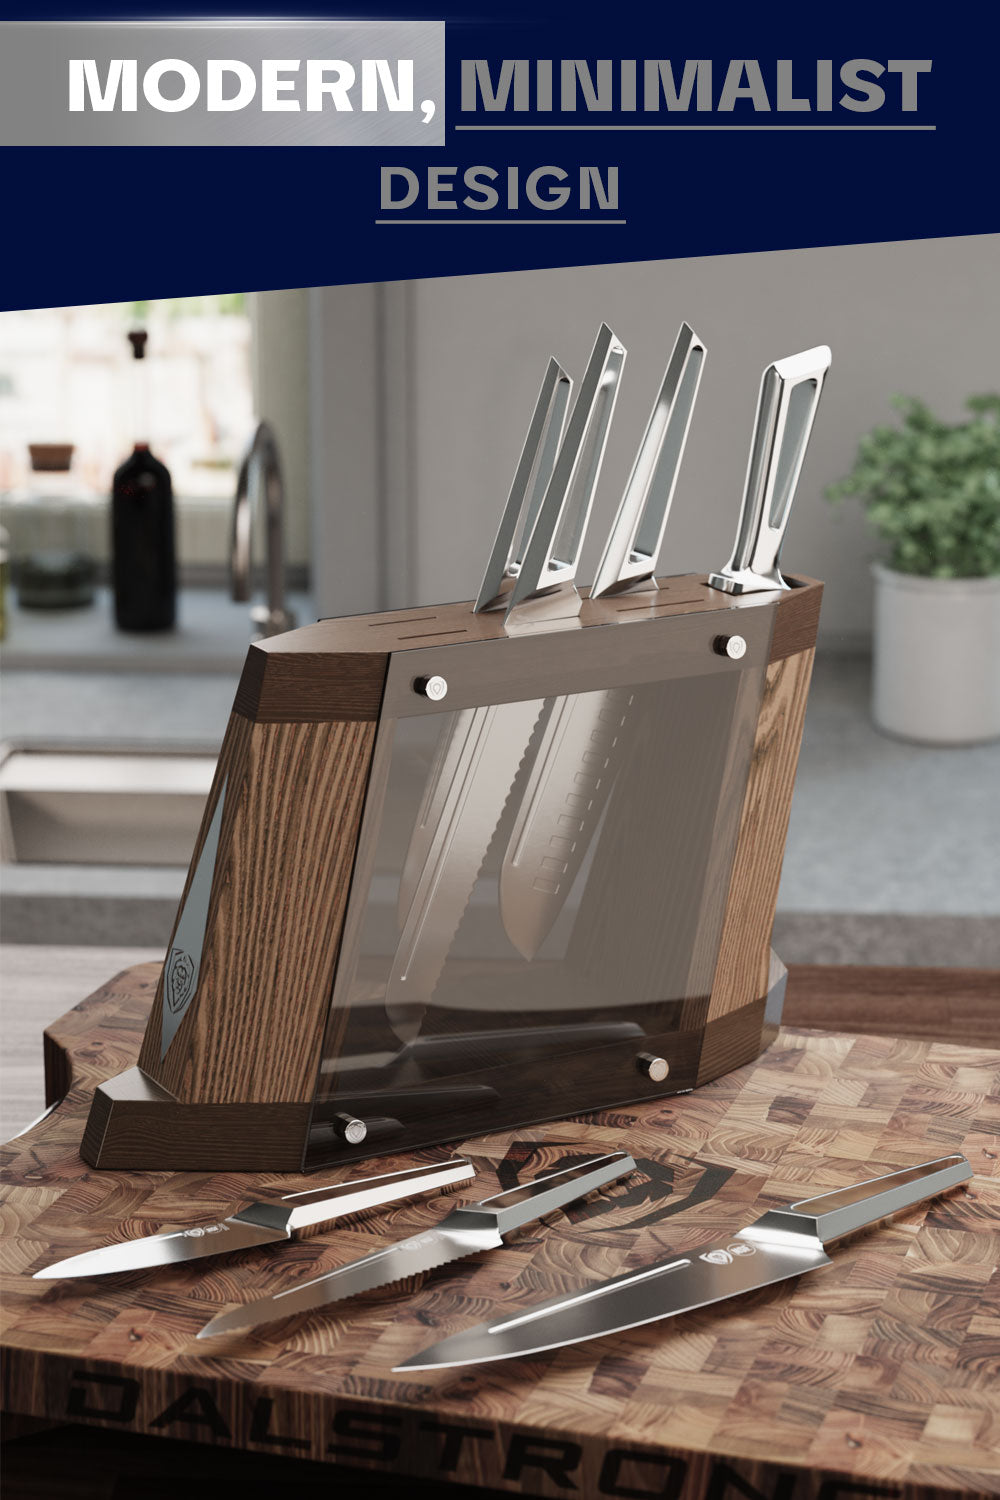 DALSTRONG - 18pc Knife Block Set - Crusader Series - Forged